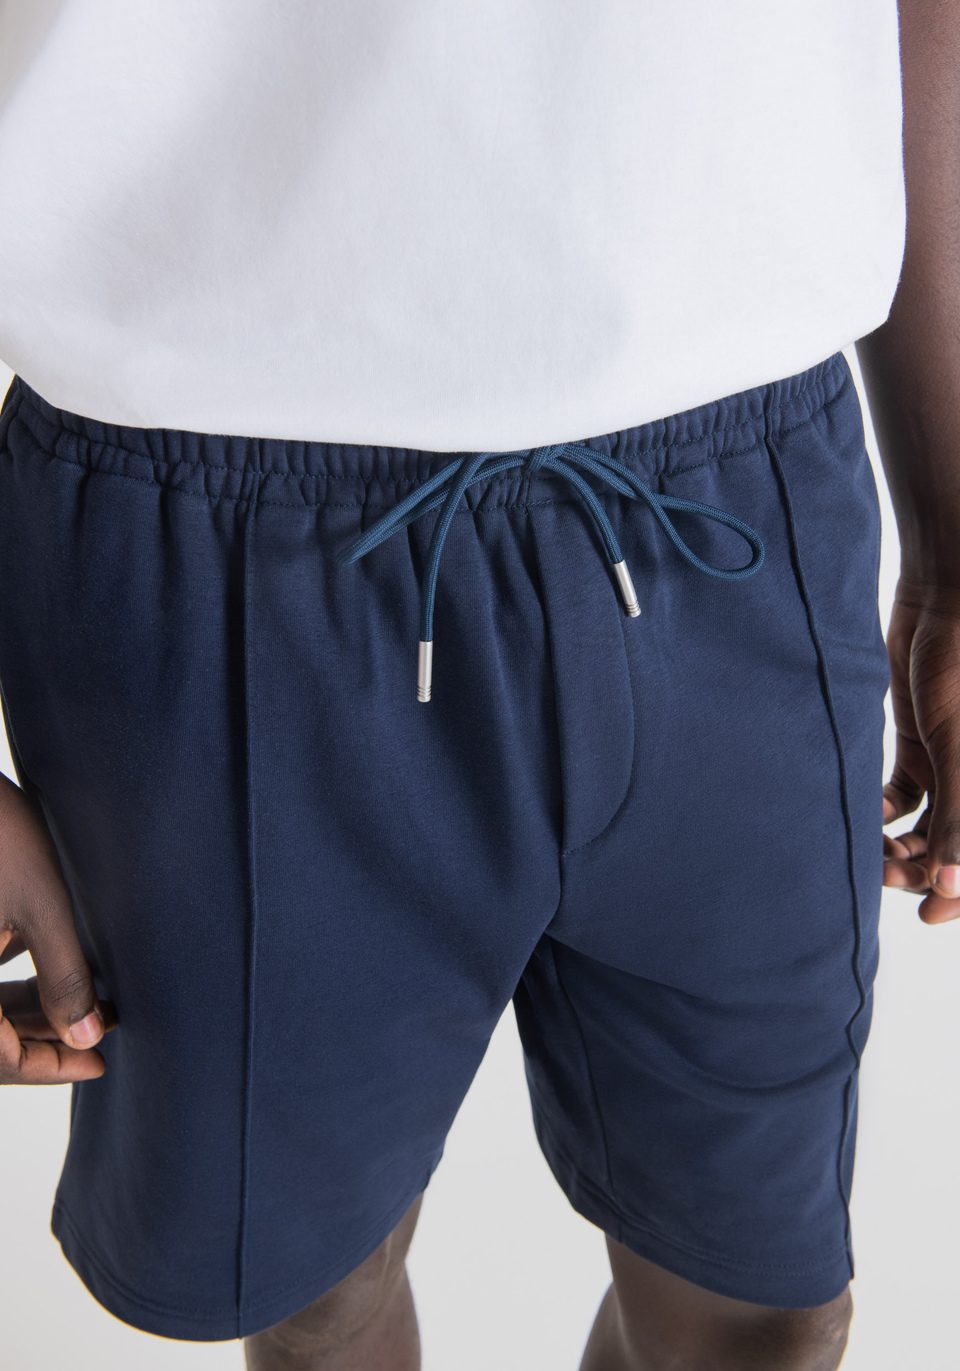 CARROT FIT SHORTS IN STRETCH COTTON BLEND WITH CENTRAL PLEAT - Antony Morato Online Shop